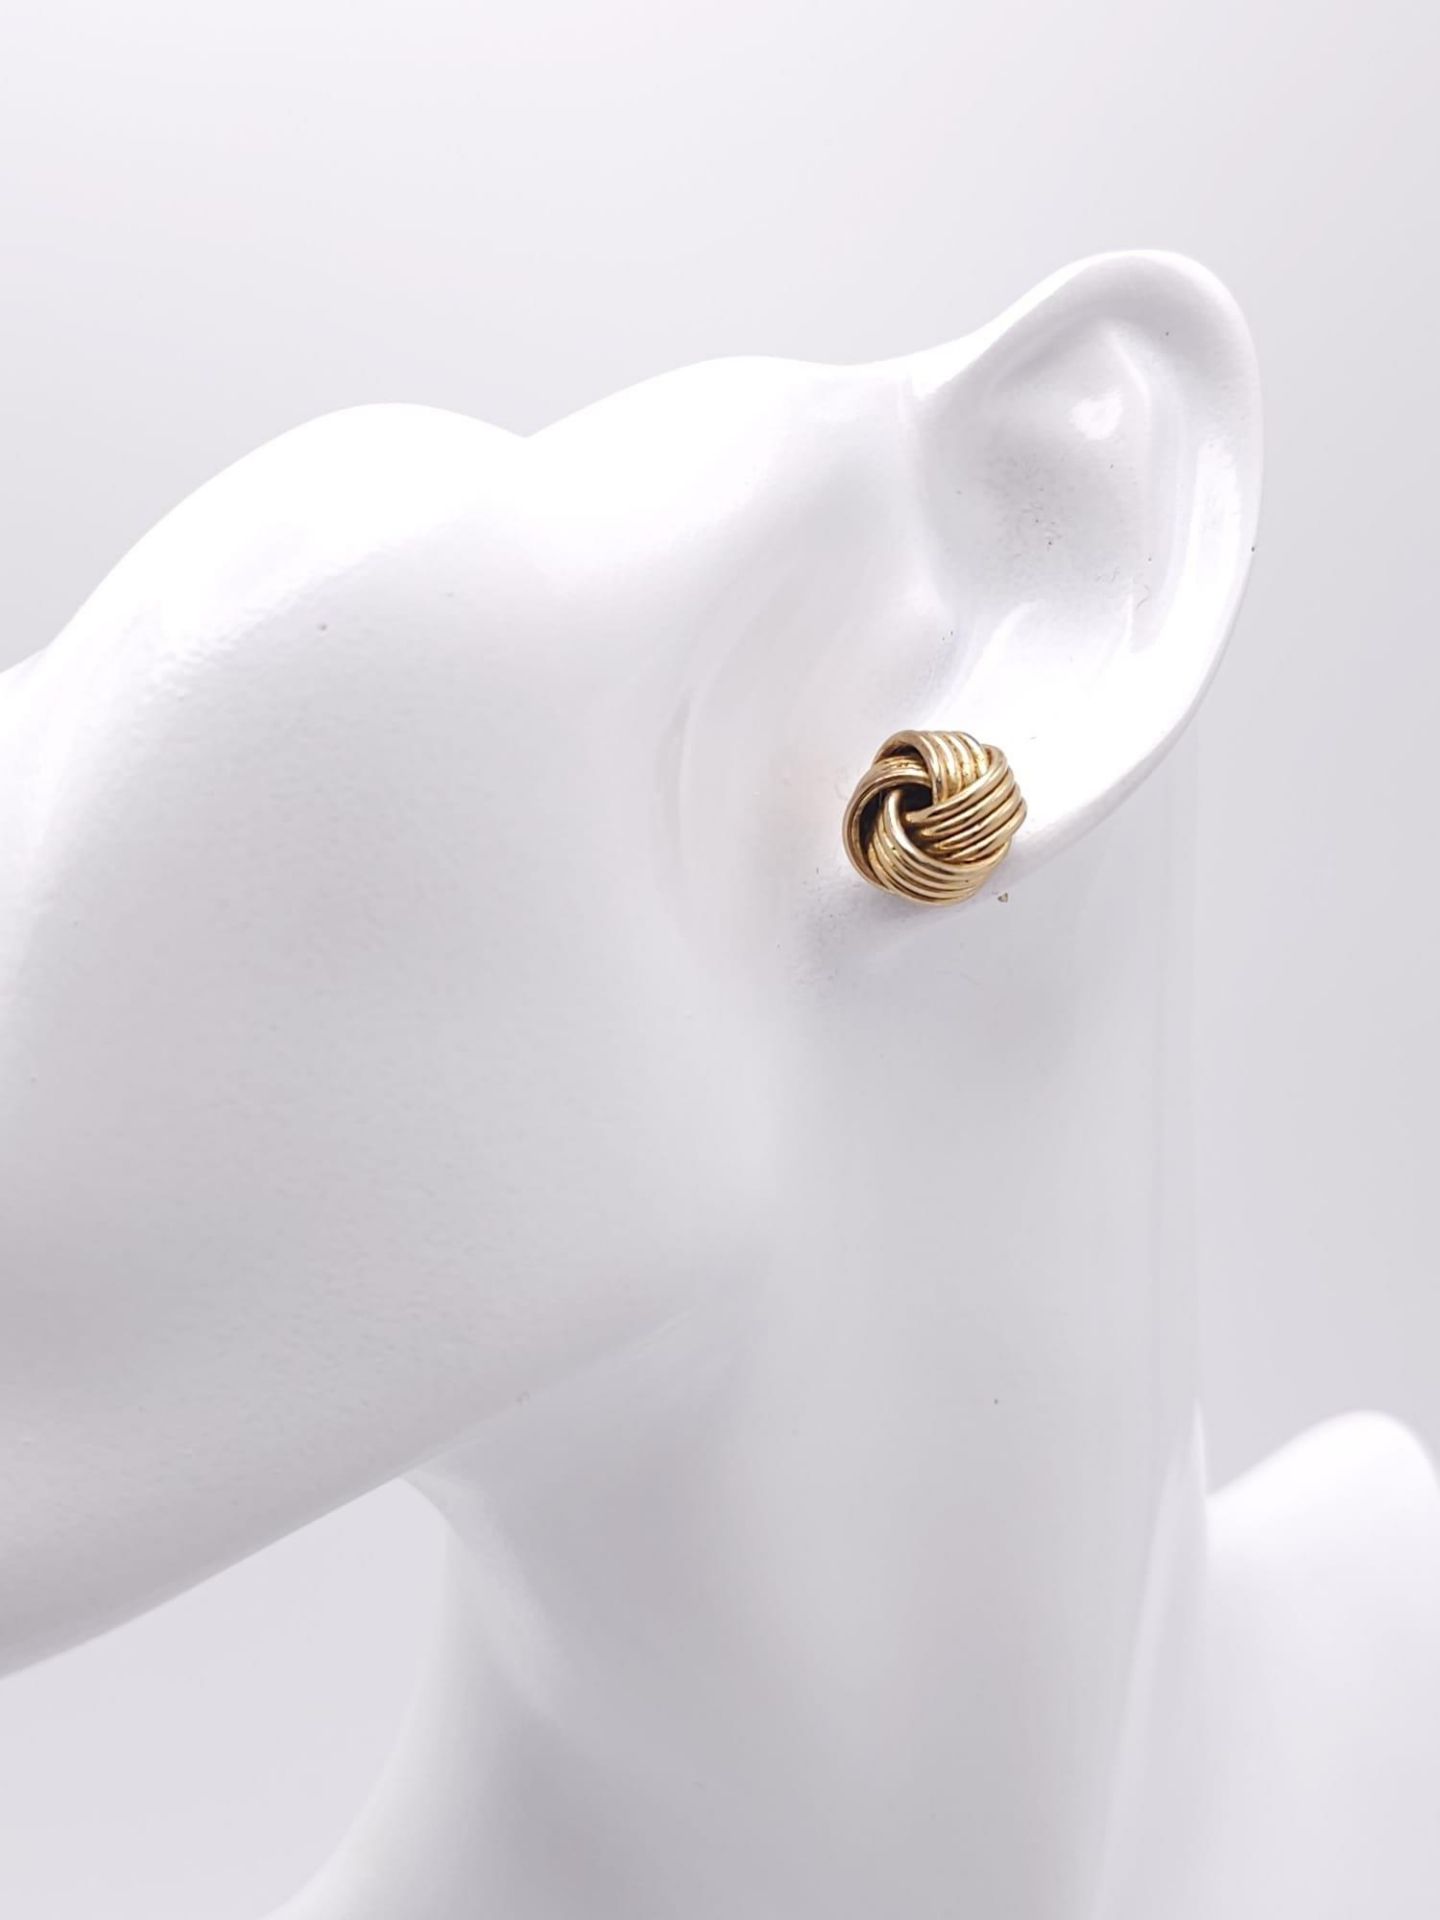 A Pair of 9k Yellow Gold Knot Stud Earrings. 3.8g total weight. Ref: 16469 - Bild 6 aus 6